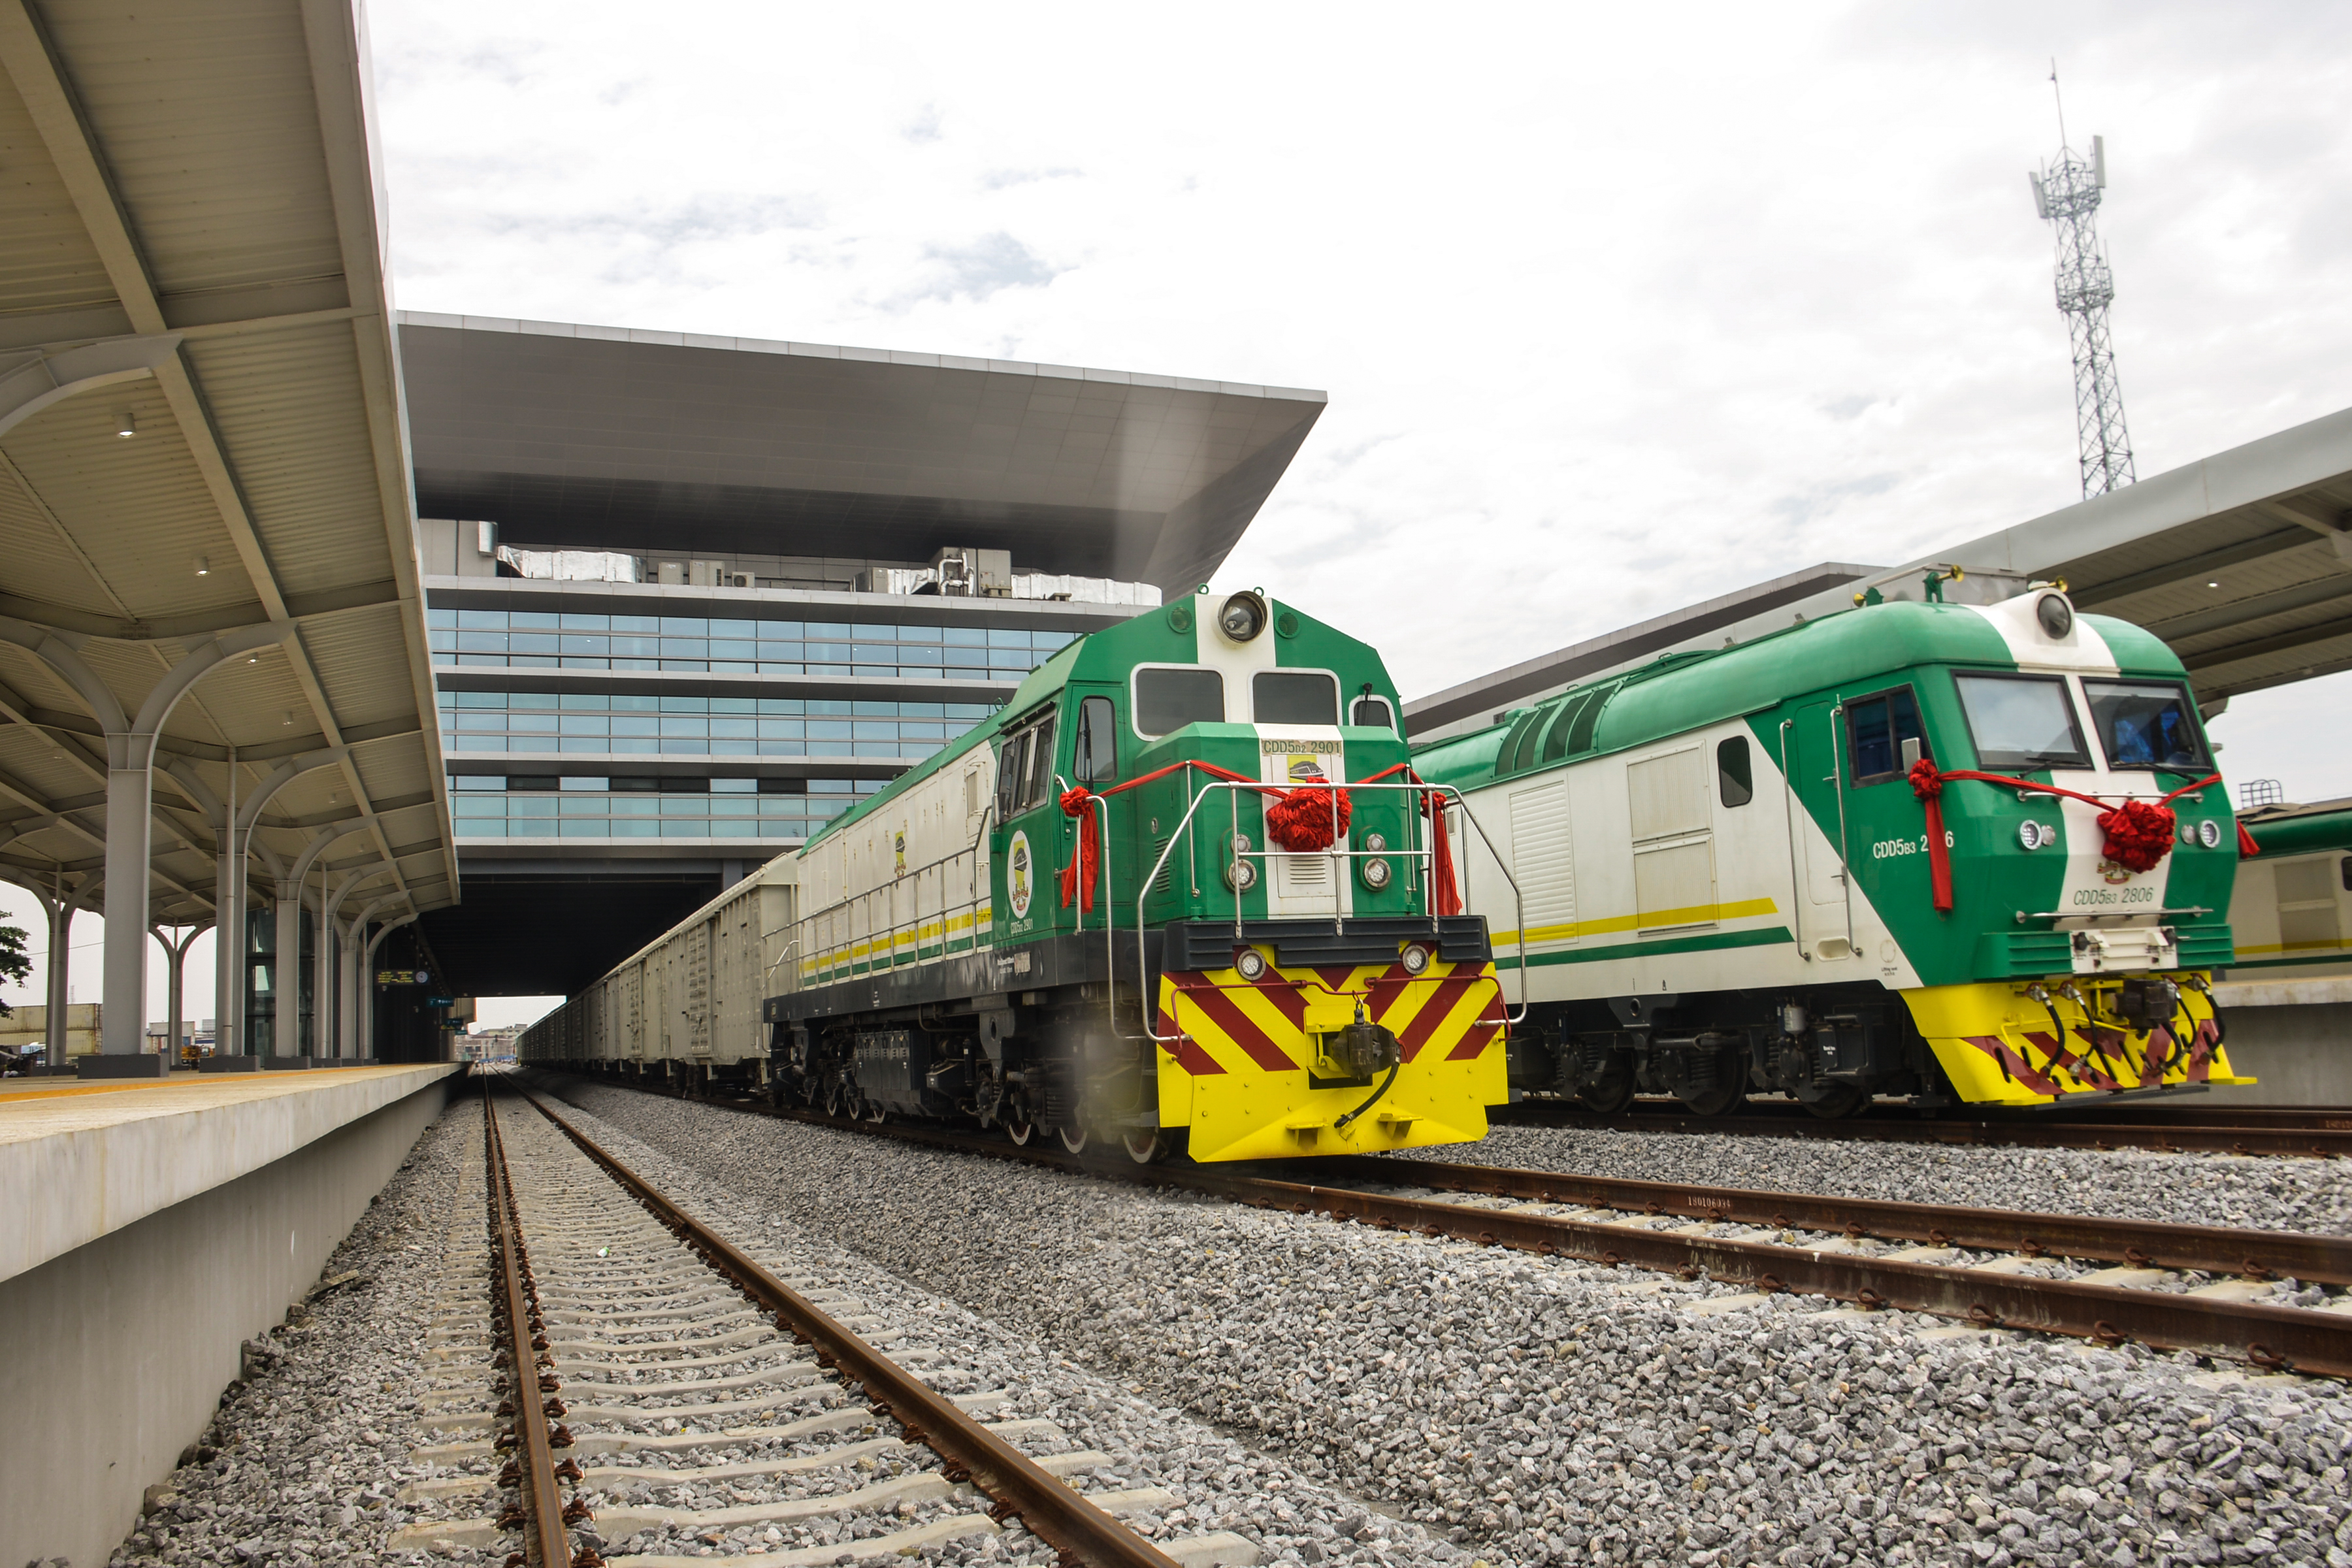 A newly commissioned Nigerian railway is seen Mobolaji Johnson Railway Station in Ebutemeta, Lagos, Nigeria, on June 10, 2021. President Muhammadu Buhari on Thursday visited Lagos for the inauguration of the 157-kilometer Lagos-Ibadan standard rail project at the Mobolaji Johnson railway station in Ebutte Metta. The Construction which started in March 2017, and test-running commenced in December 2020. The Ebute Metta Station, known as the Mobolaji Johnson Station, is the largest railway station in West Africa with a holding capacity of 6000 passengers A statement from the precedential aide ''''Femi Adesina''.  ''President Buhari is committed to developing a modern national railway network that will connect every part of Nigeria, and promote trade, travel, tourism, commerce and national integration.'' (Photo by Olukayode Jaiyeola/NurPhoto)NO USE FRANCE